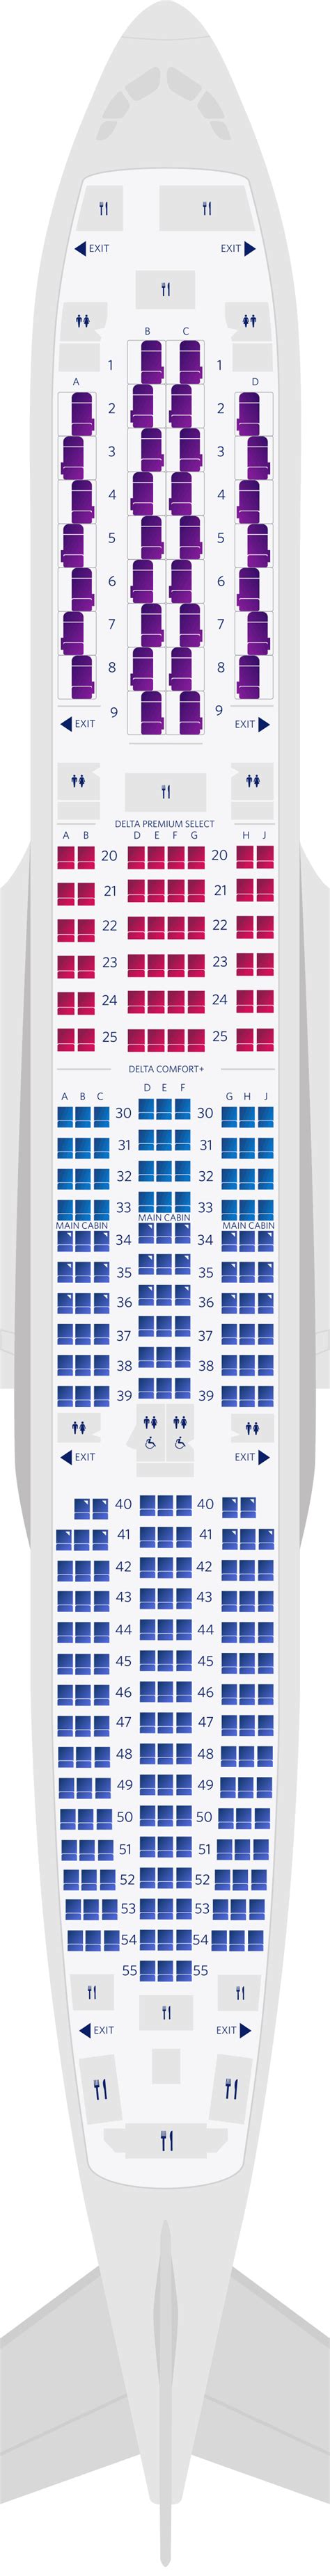 Learn About Imagen Airbus A Seat Map Delta In Thptnganamst Edu Vn